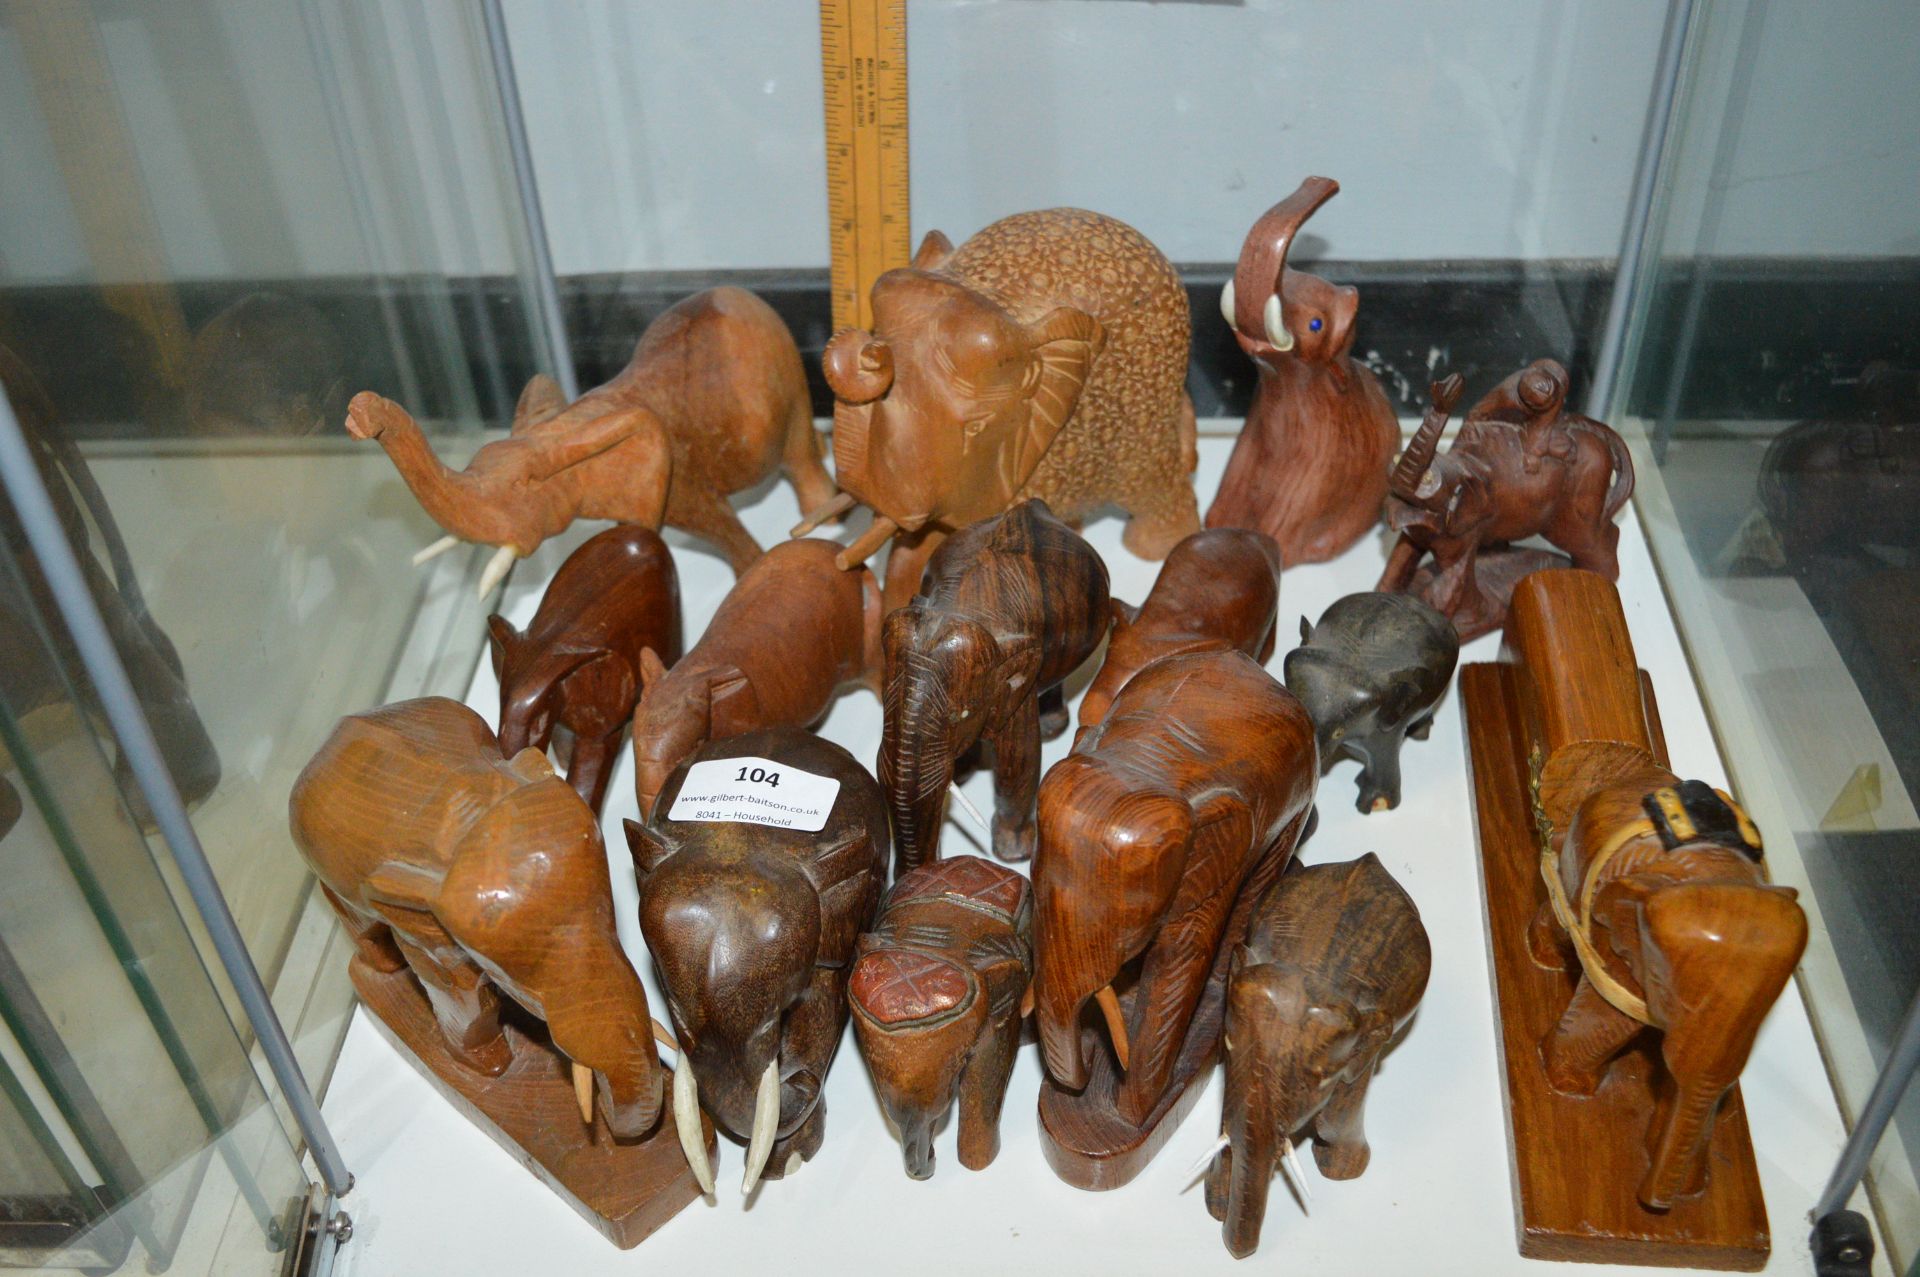 Fifteen Hand Carved Wooden Elephant Figurines